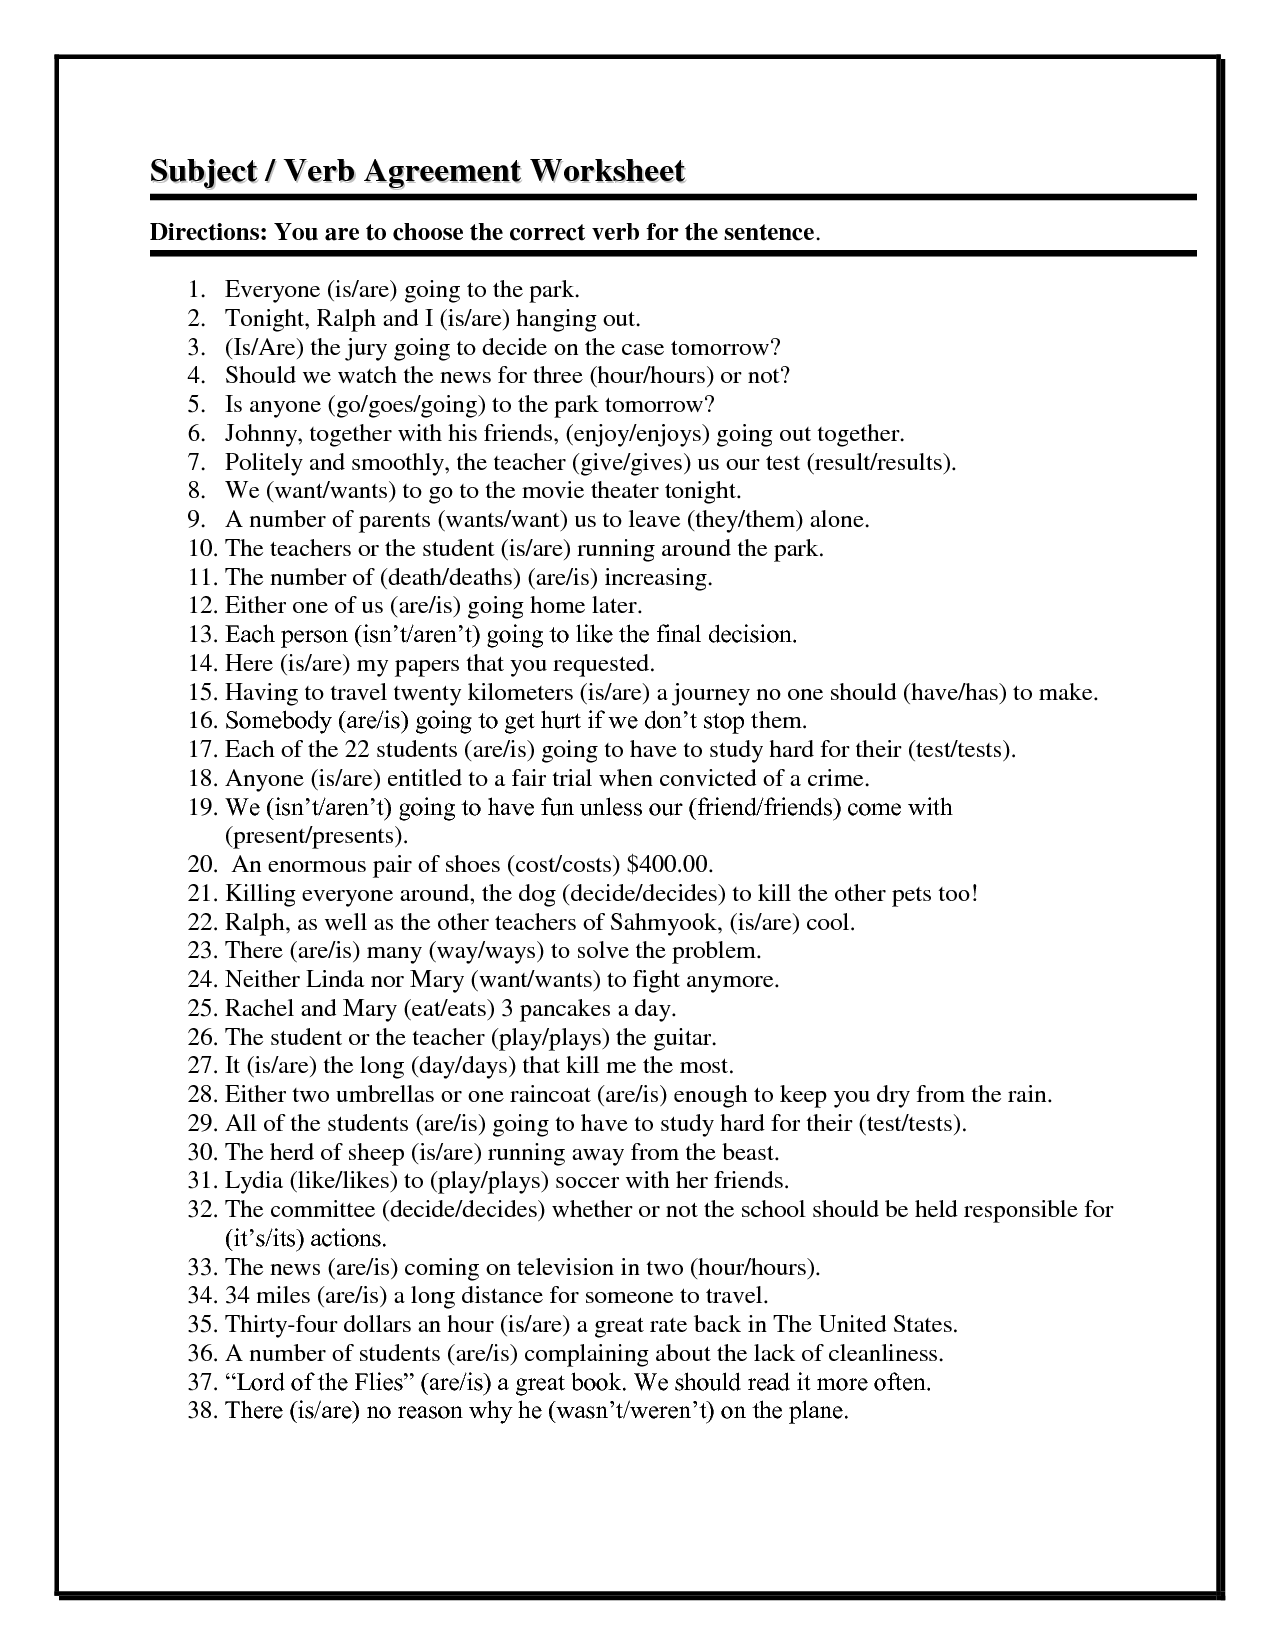 12-best-images-of-subject-verb-agreement-worksheets-3rd-grade-mall-scavenger-hunt-party